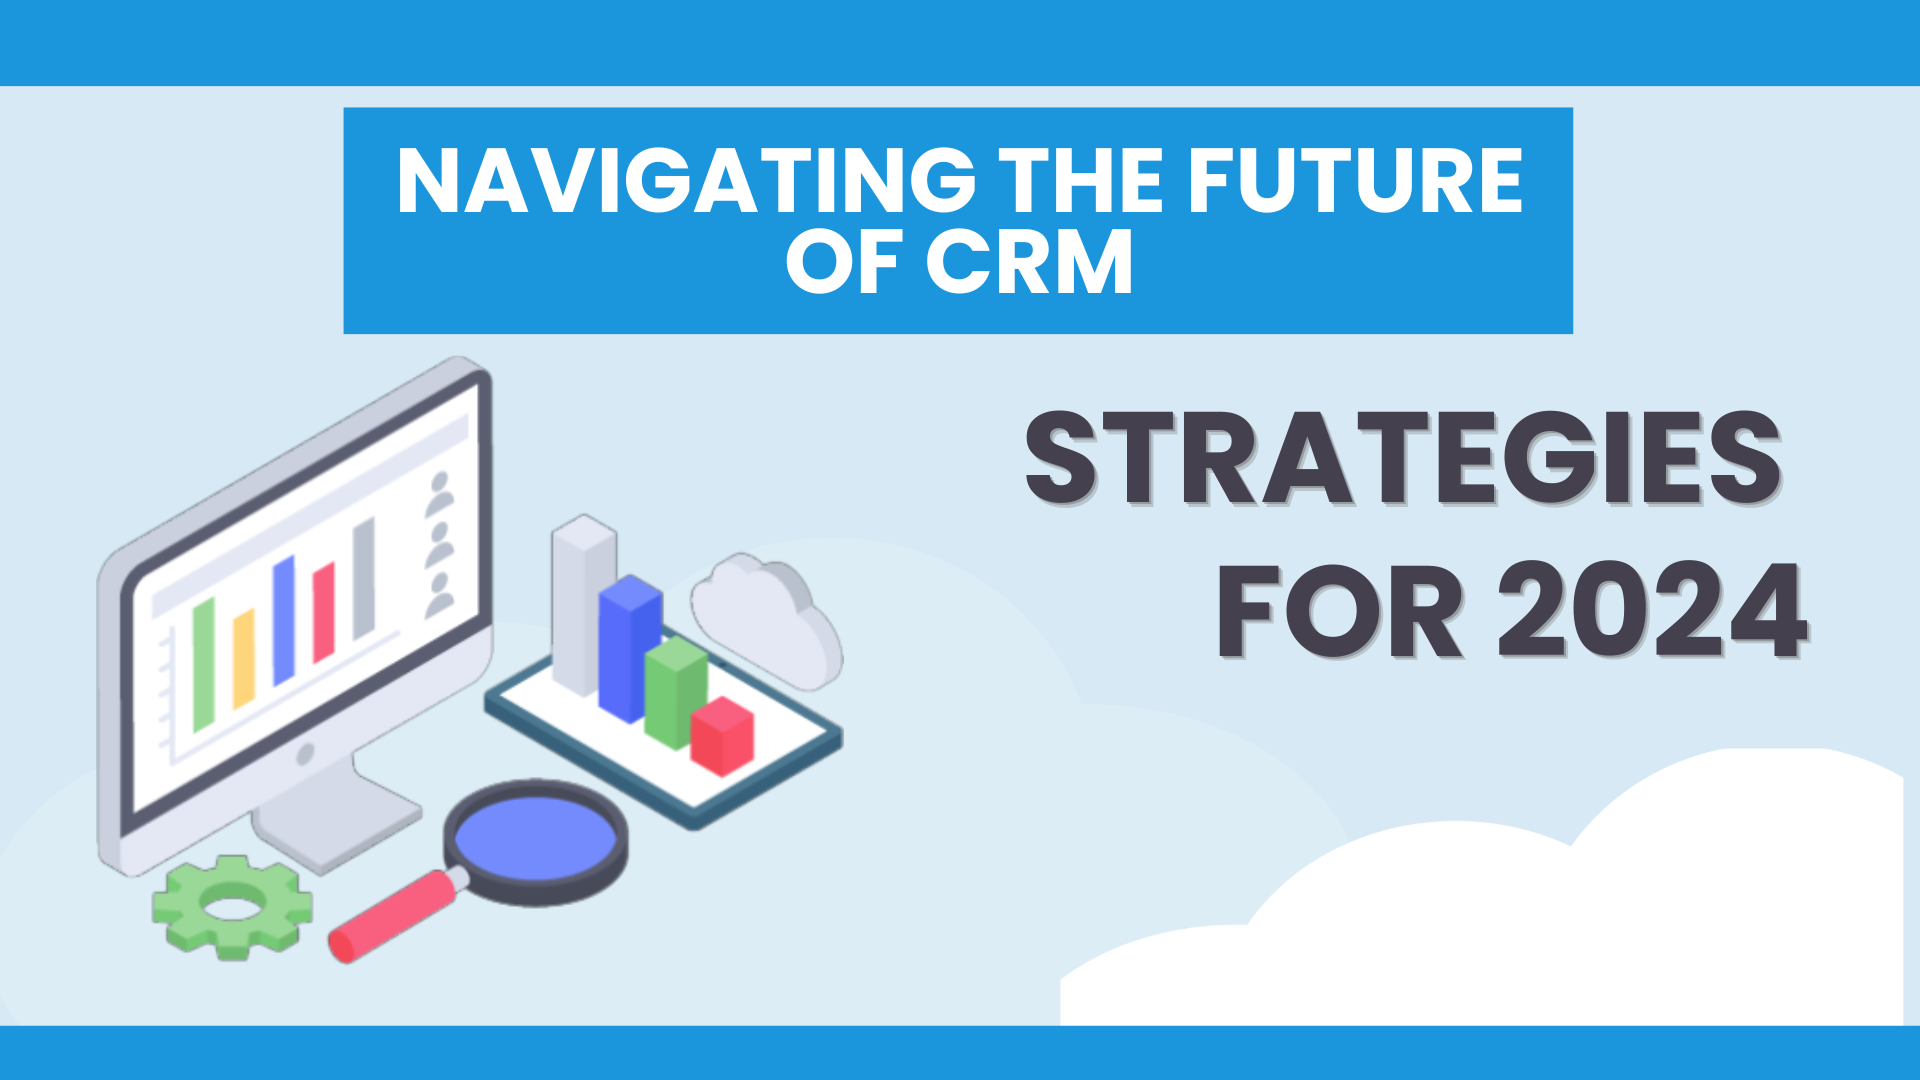 Navigating the Future of CRM: Strategies for 2024